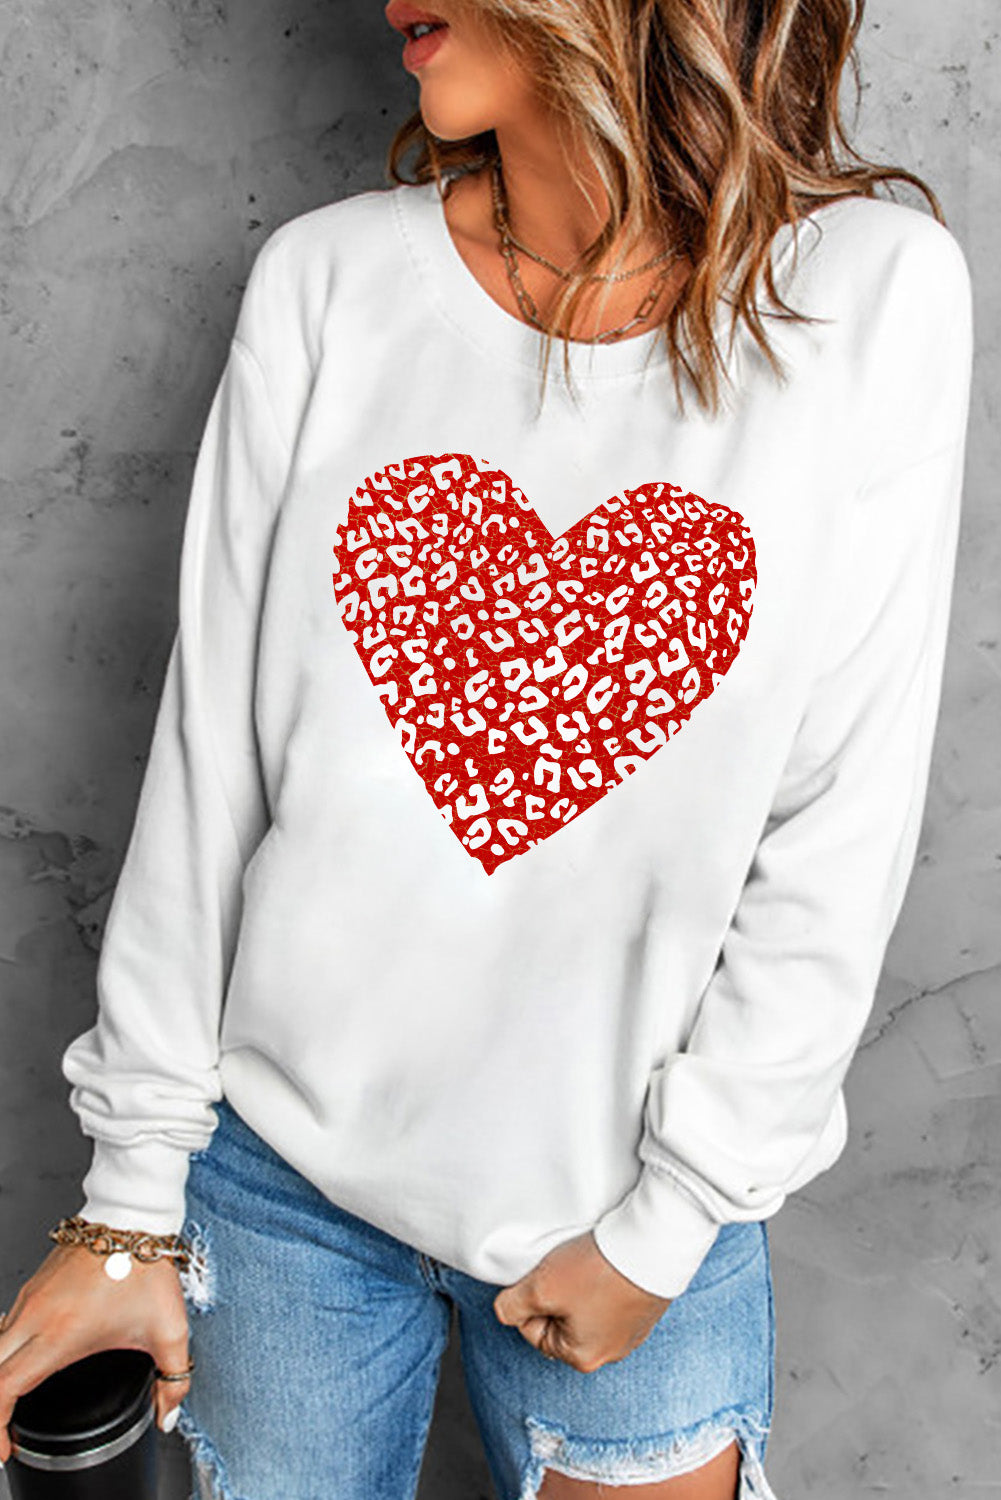 LADIES-HEART--Red and White Heart Graphic, Drop Shoulder Sweatshirt